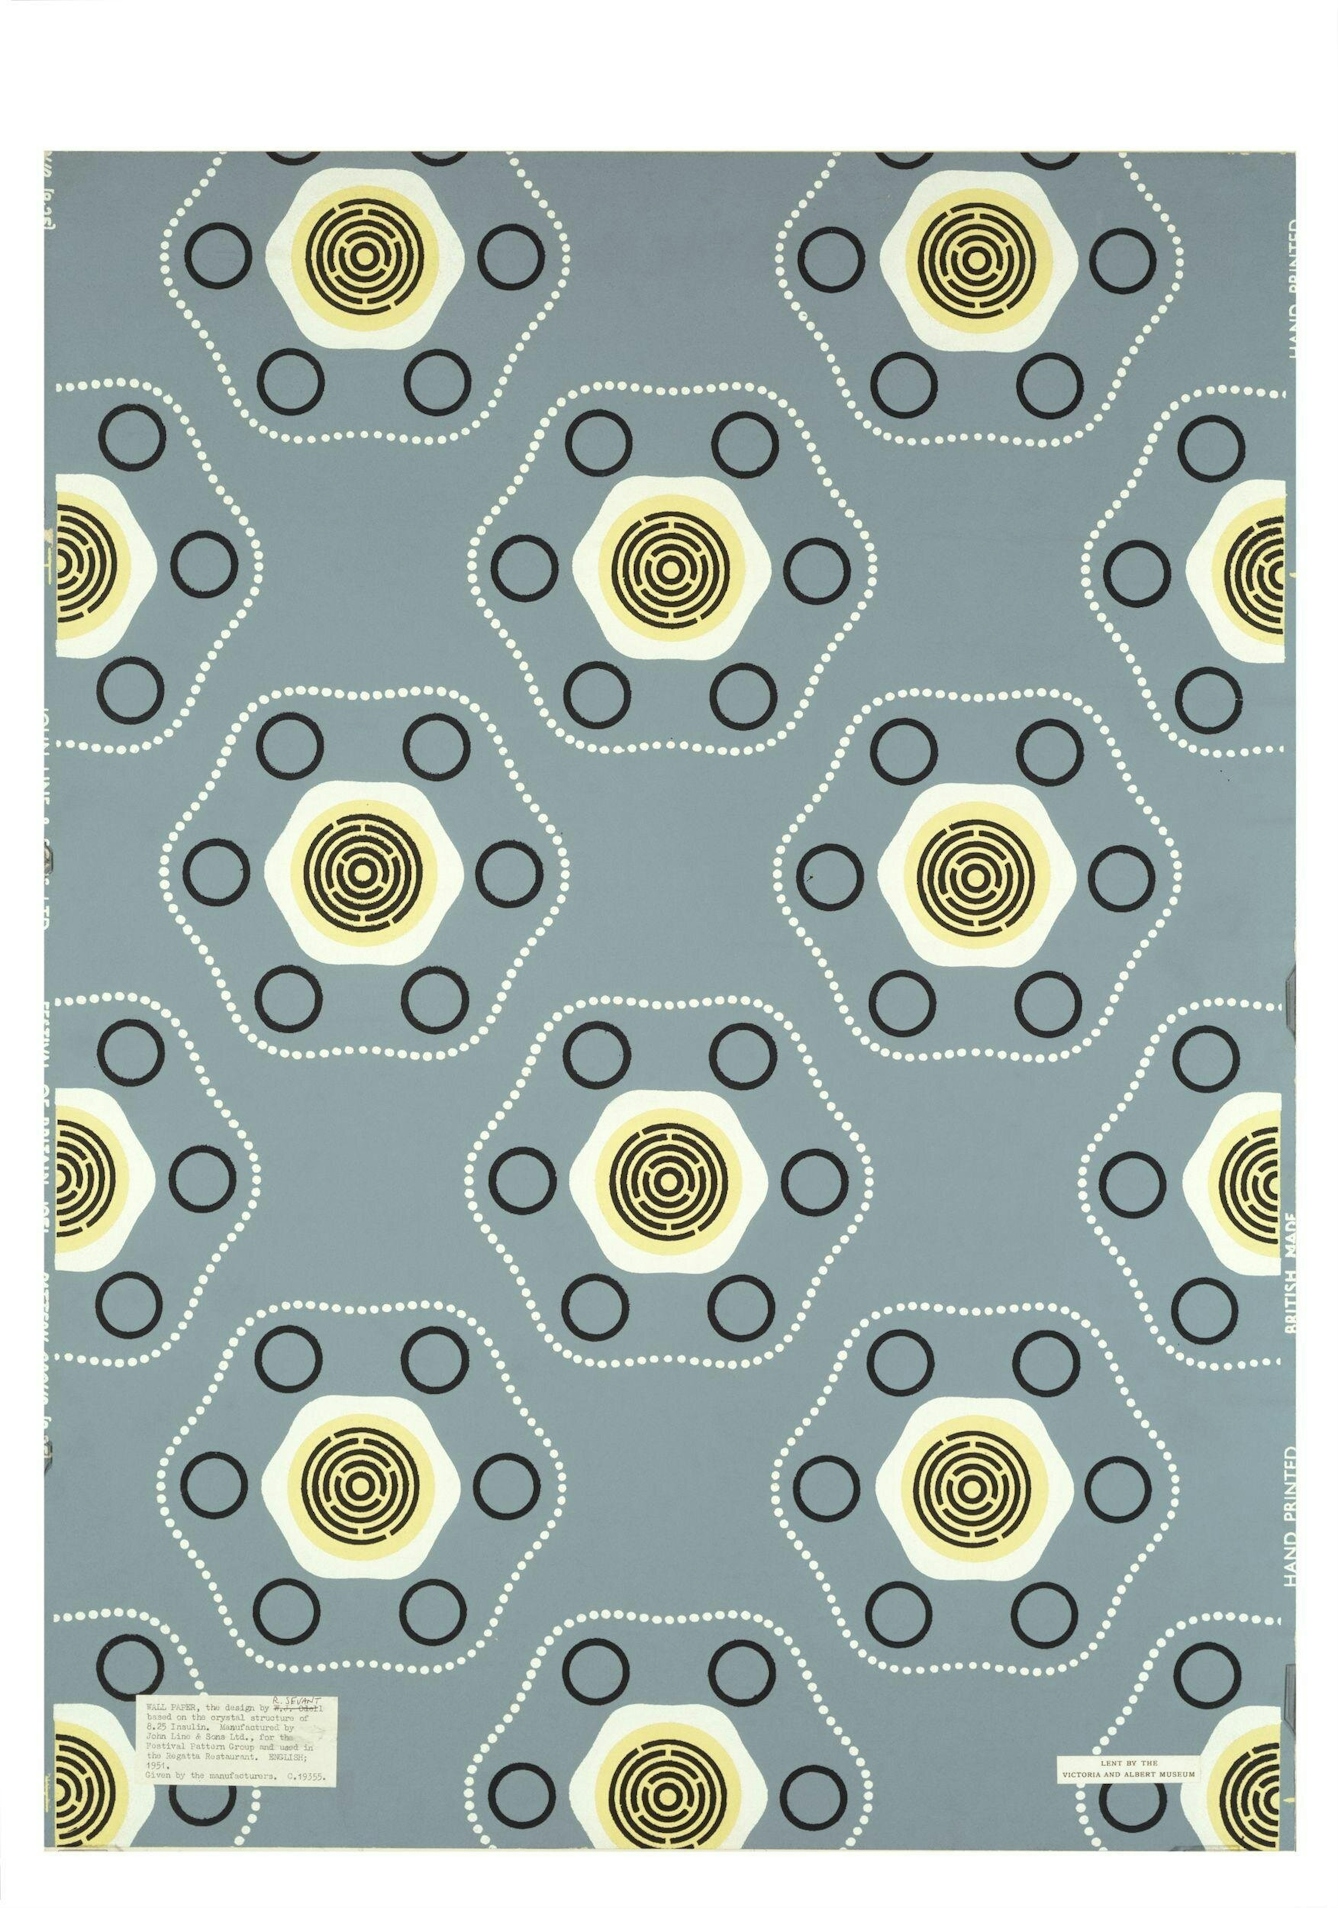 Portion of 'Insulin 8.25' wallpaper, a design based on the crystalline structures of insulin. Image shows a repeating pattern of circles and doted lines arranged in hexagons.